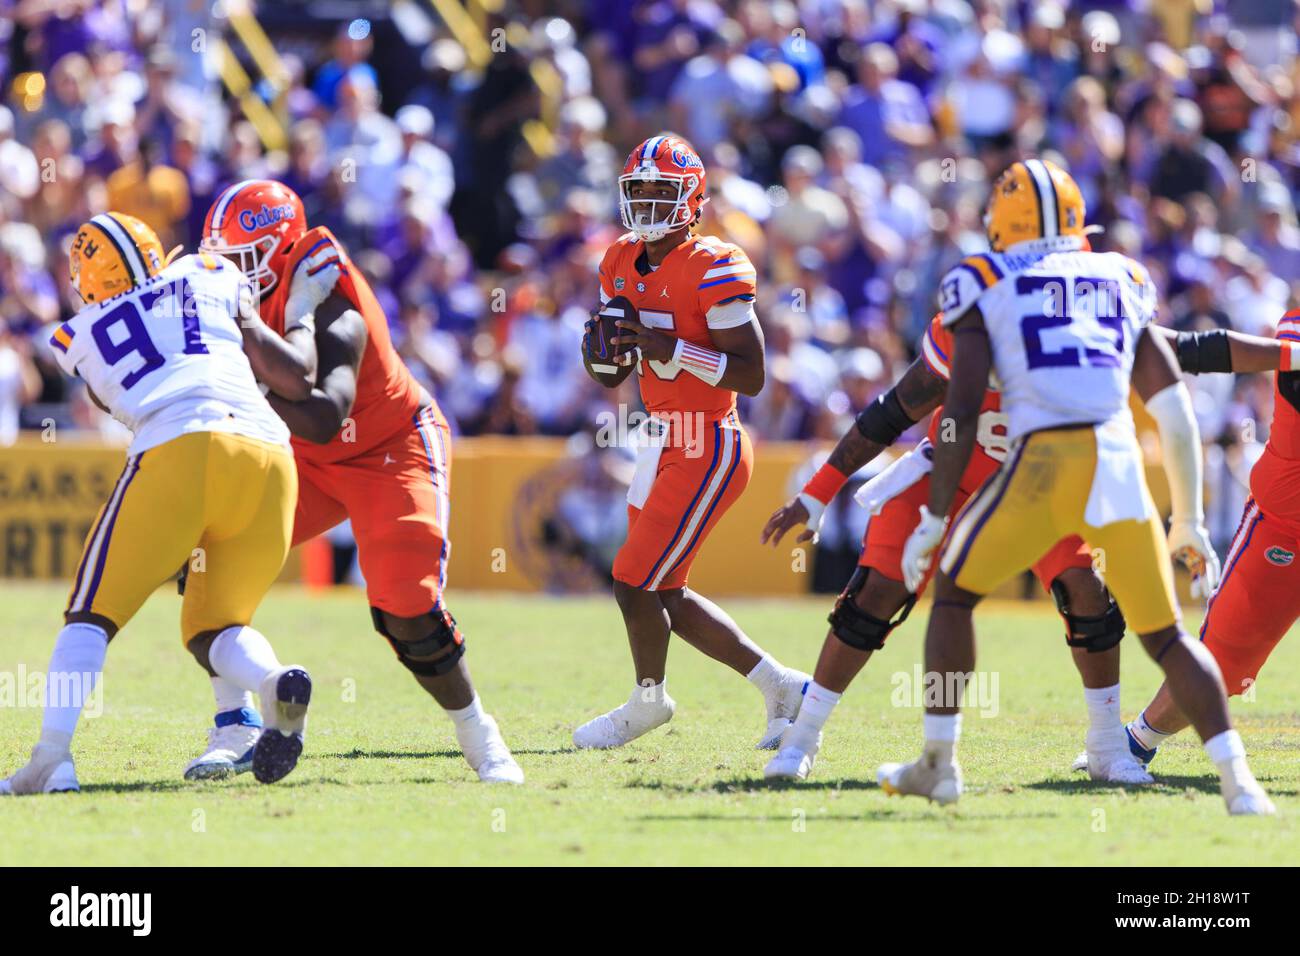 Florida Gators quarterback Anthony Richardson (15) scans the field to pass against the LSU Tigers defense, Saturday, Oct. 16, 2021, in Baton Rouge, Lo Stock Photo